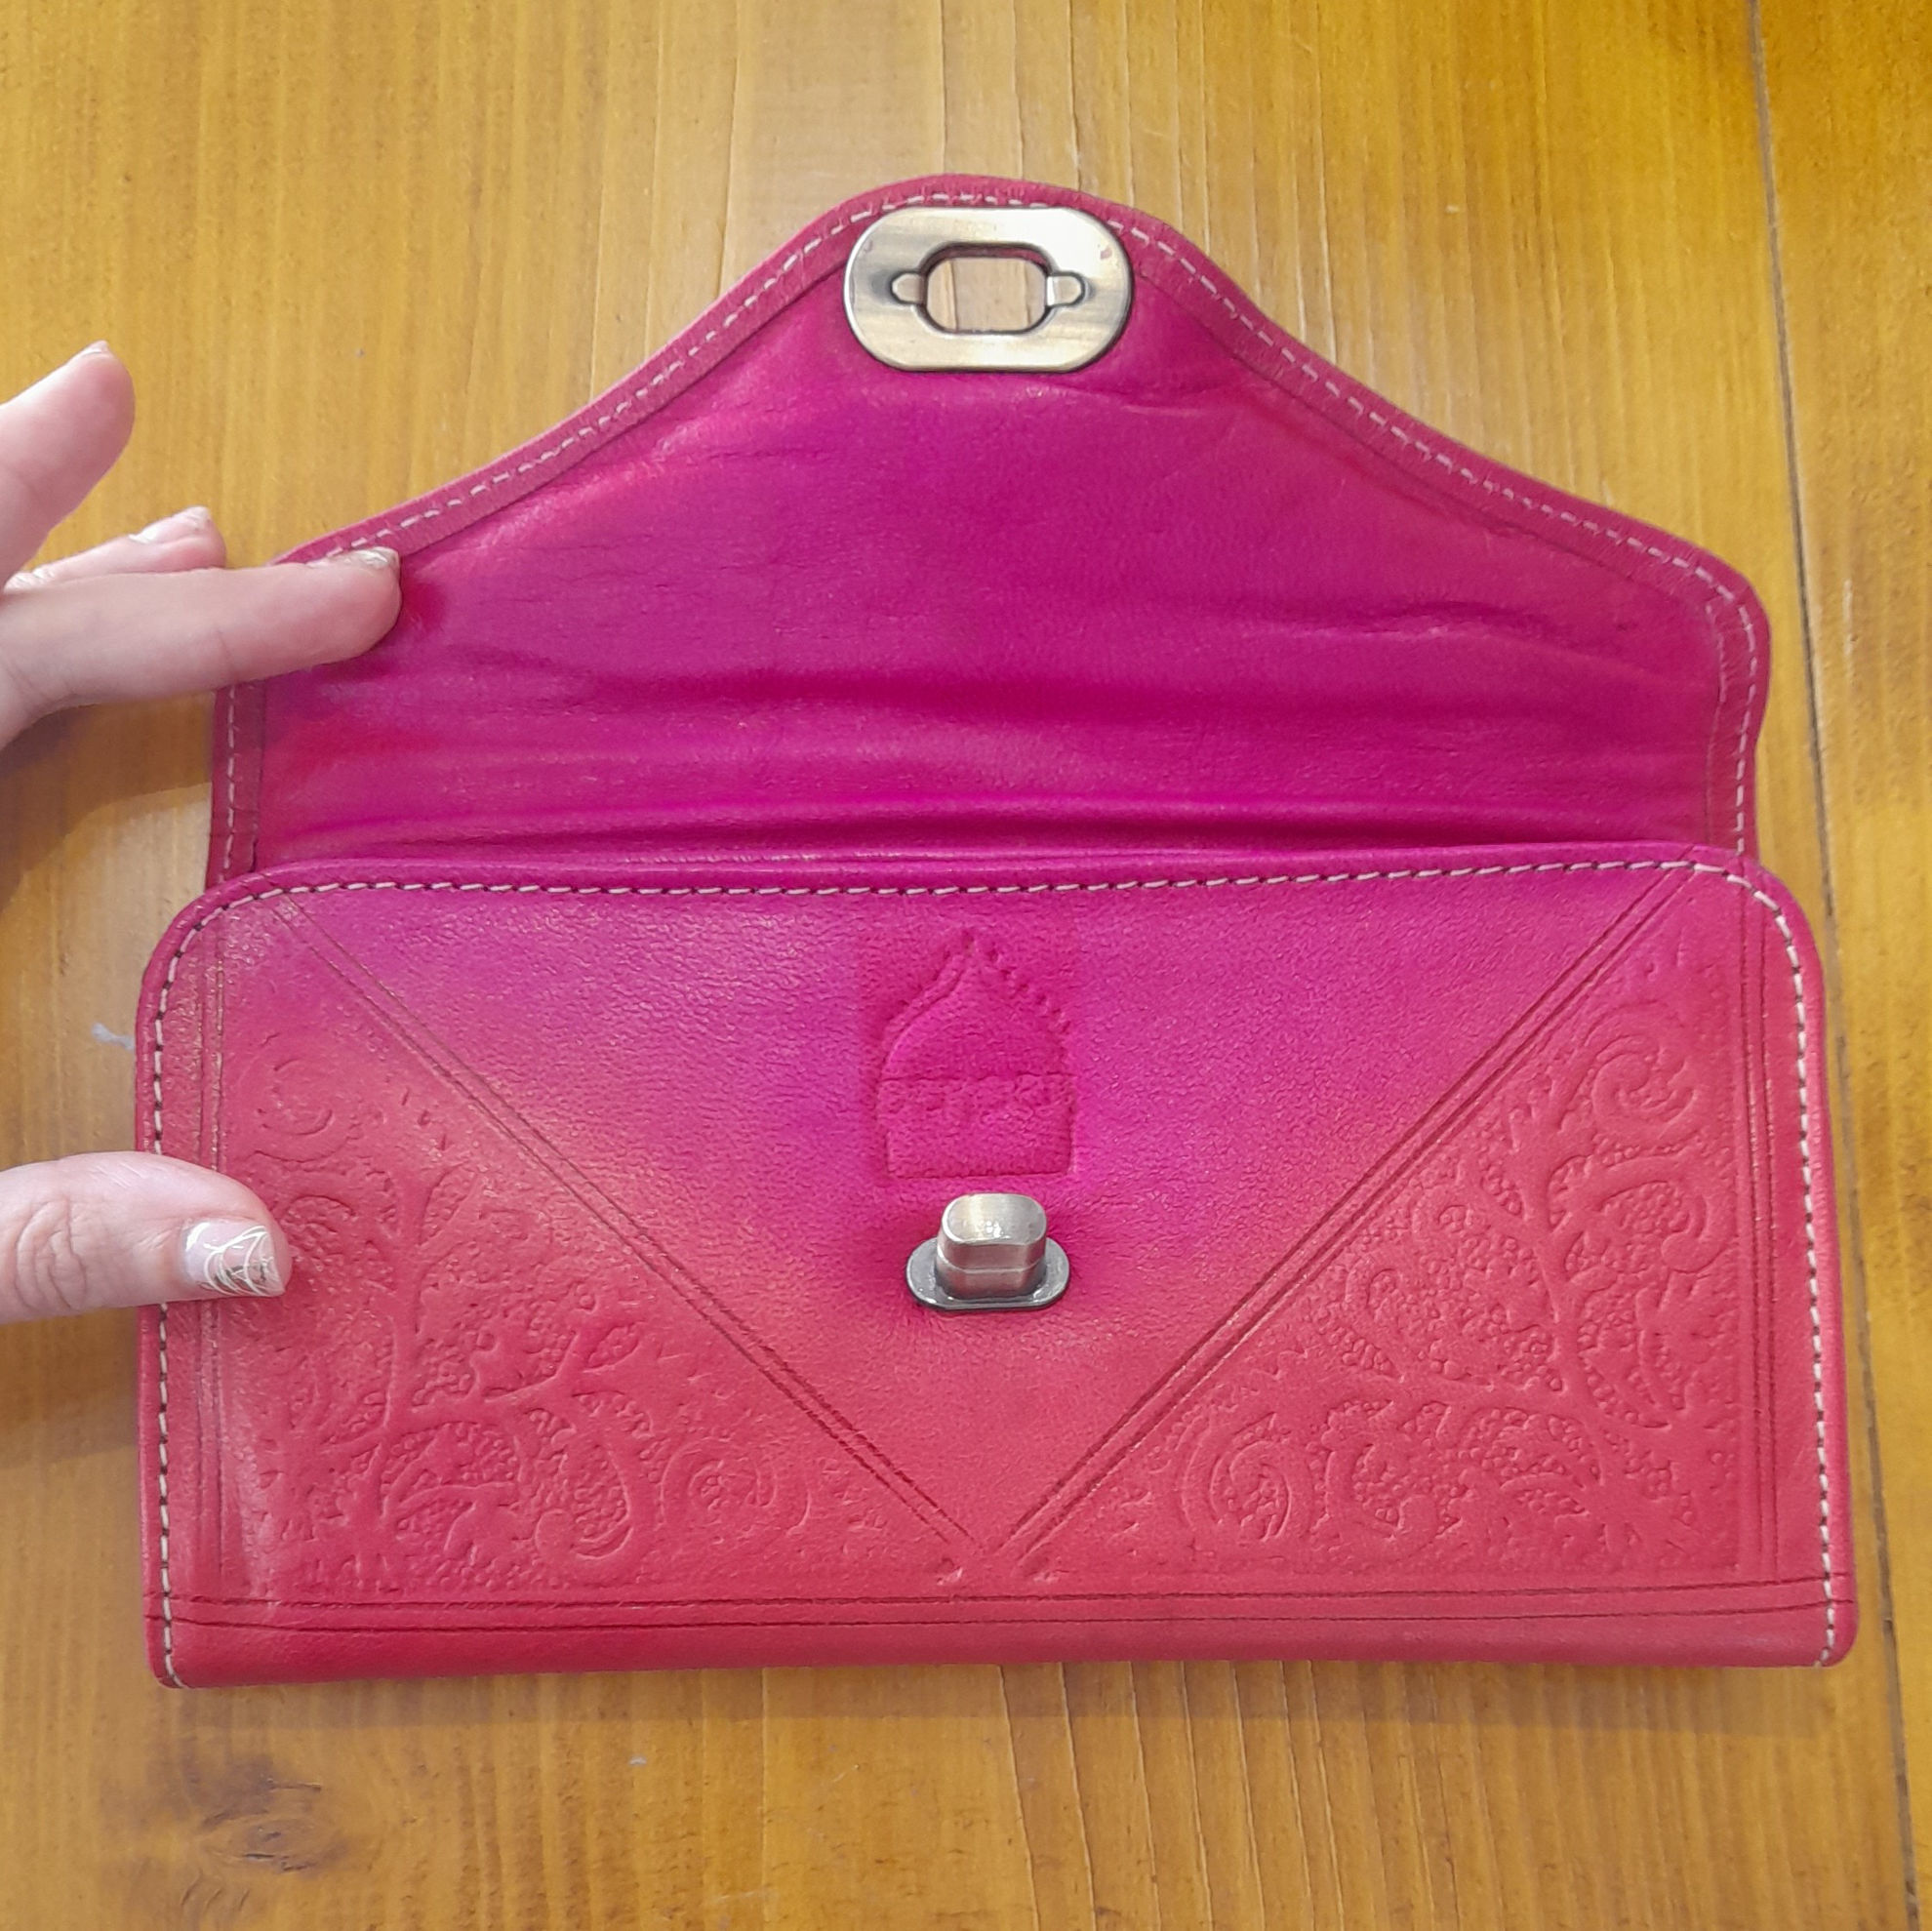 second-large-tri-fold-purse-in-pink